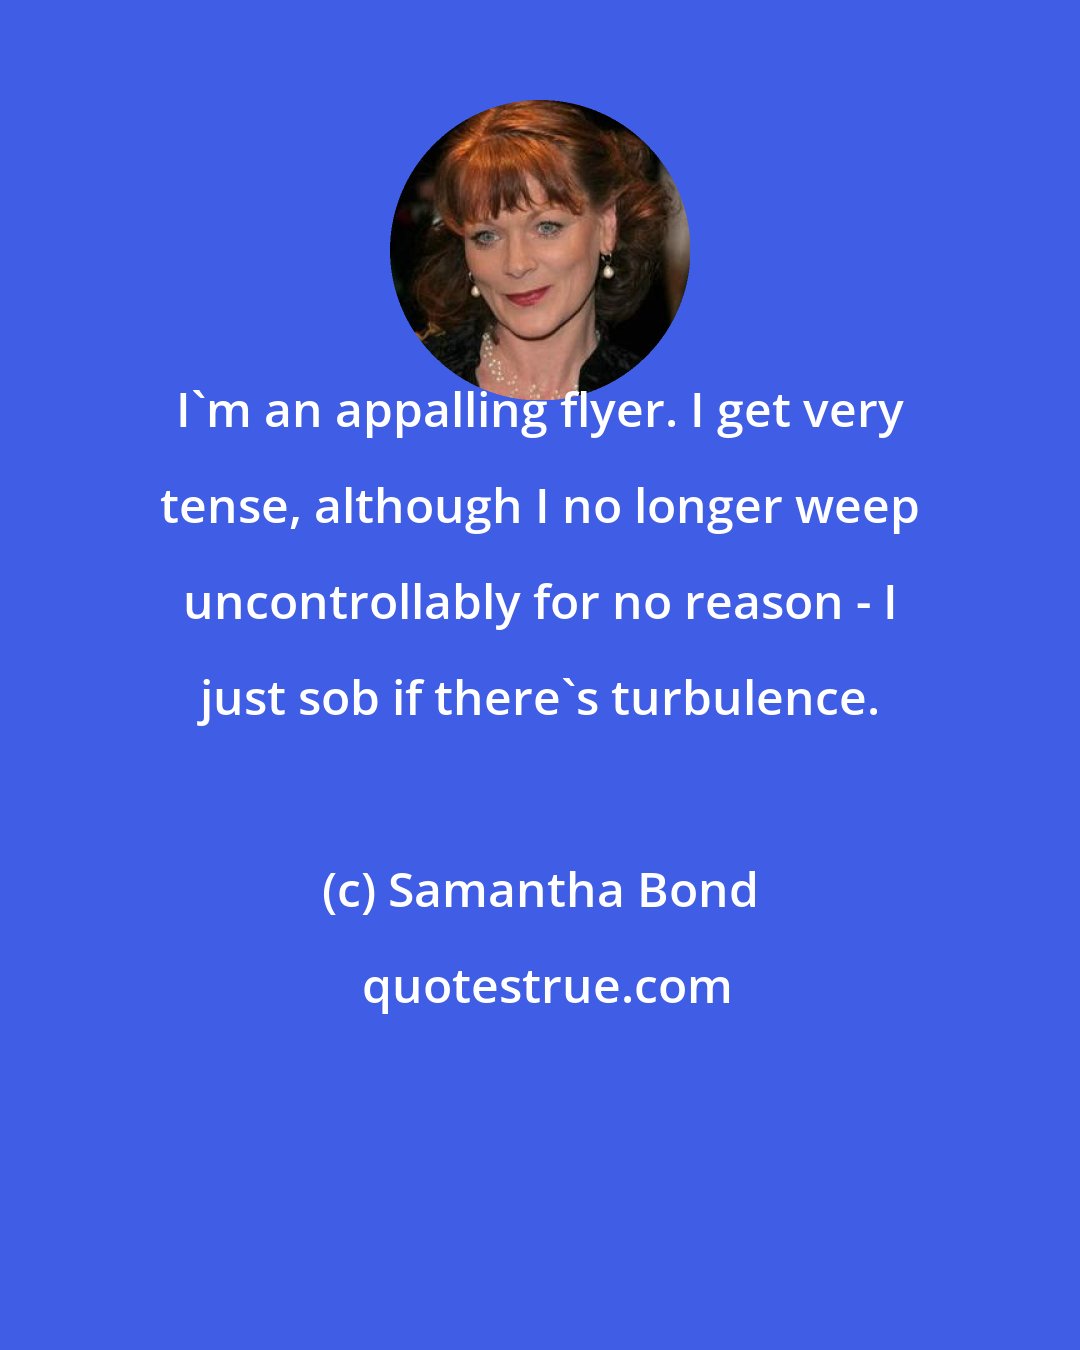 Samantha Bond: I'm an appalling flyer. I get very tense, although I no longer weep uncontrollably for no reason - I just sob if there's turbulence.